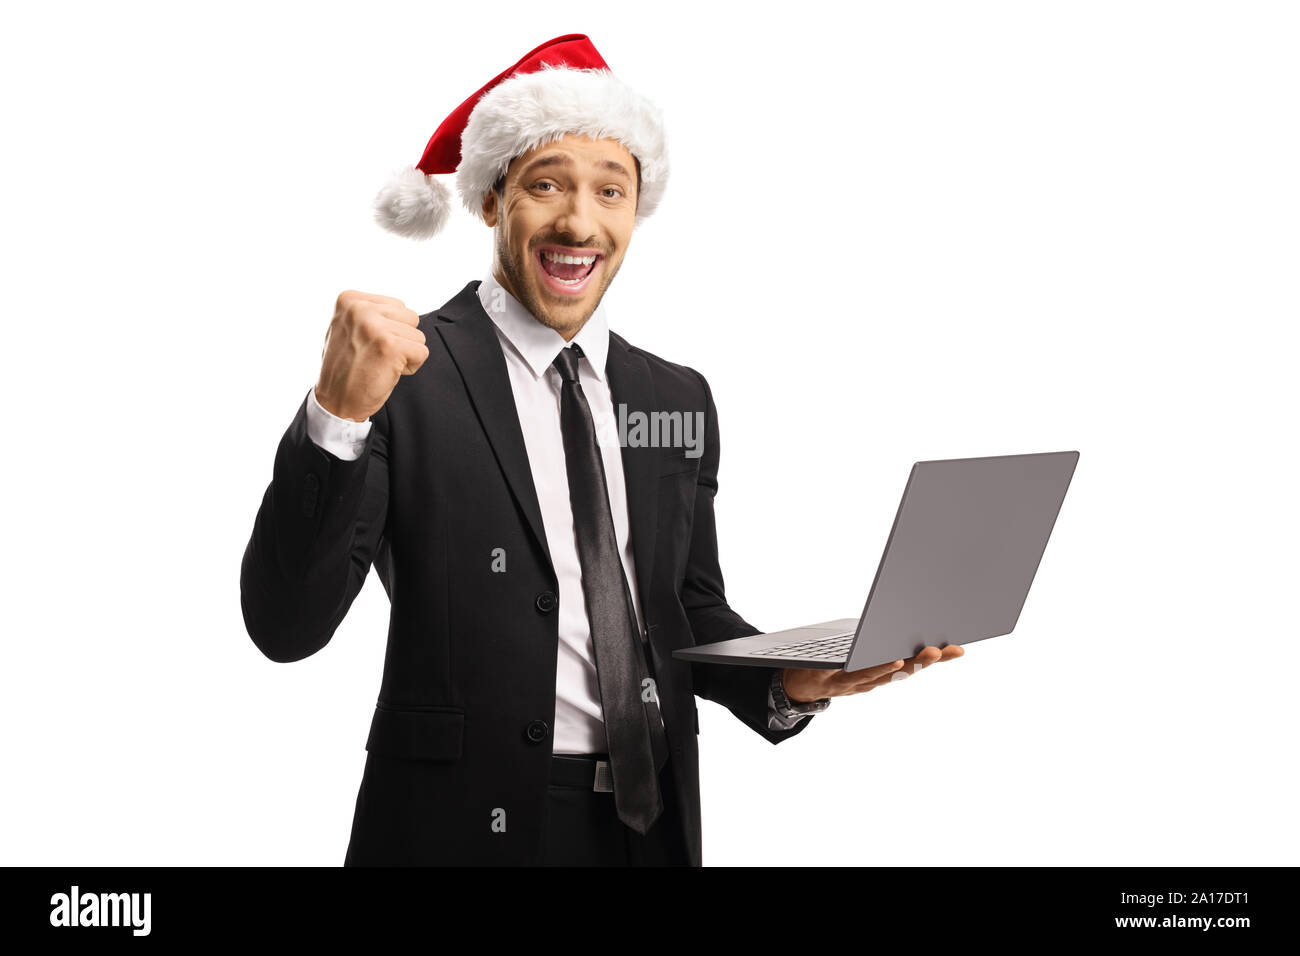 Young professional man in a suit with a Santa Claus hat gesturing happiness and holding a laptop computer isolated on white background Stock Photo